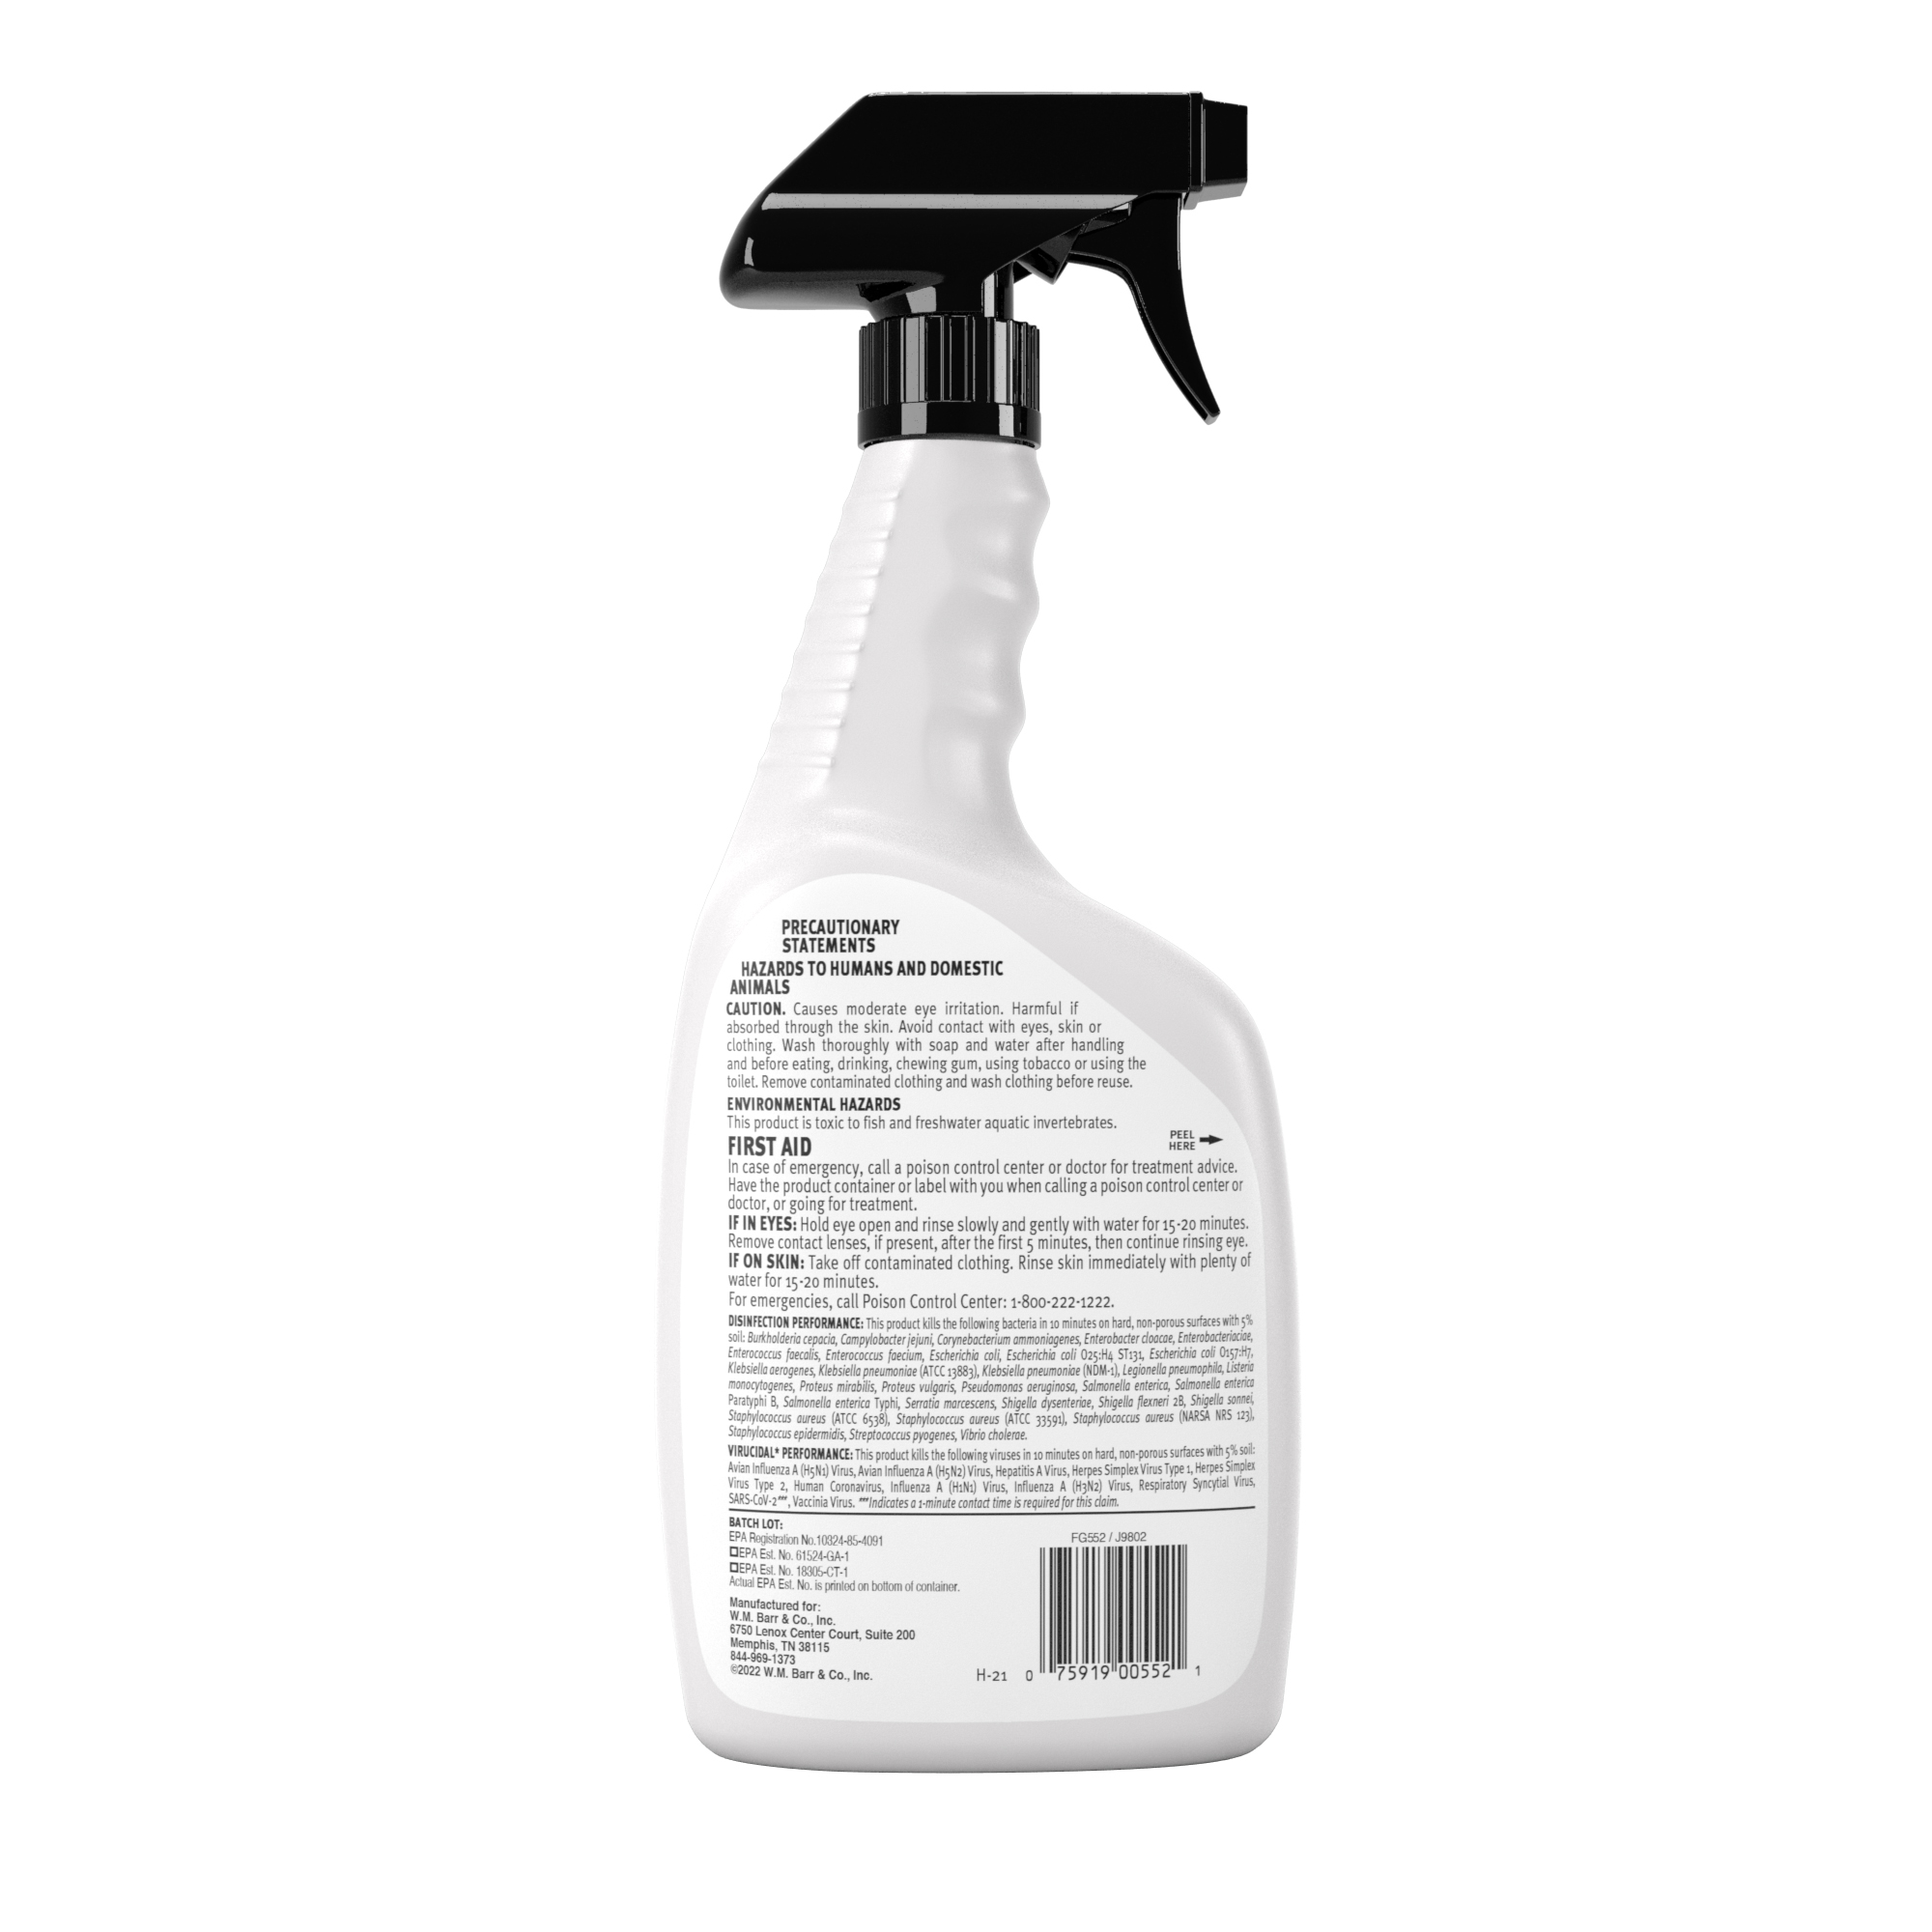 Mold Armor FG552 Mold Remover and Disinfectant, 32 Ounce, Liquid,  Benzaldehyde Organic, Clear: Mold & Mildew Remover (075919005521-1)